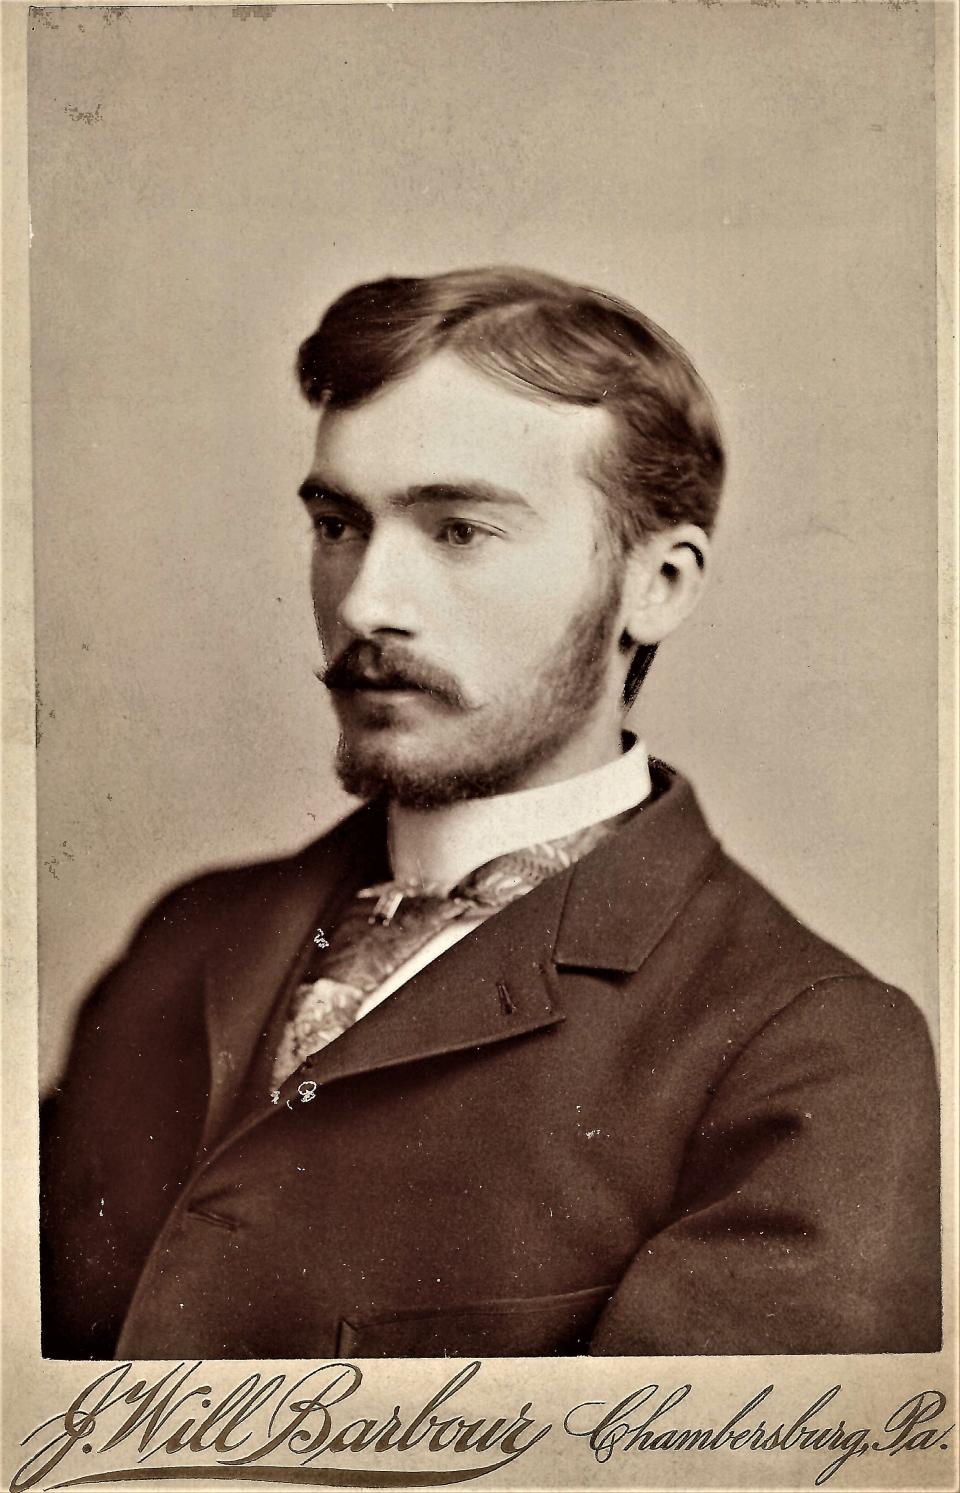 J. Will Barbour took this photo of himself in the early 1890s. It's the known photograph of Barbour sporting a beard.